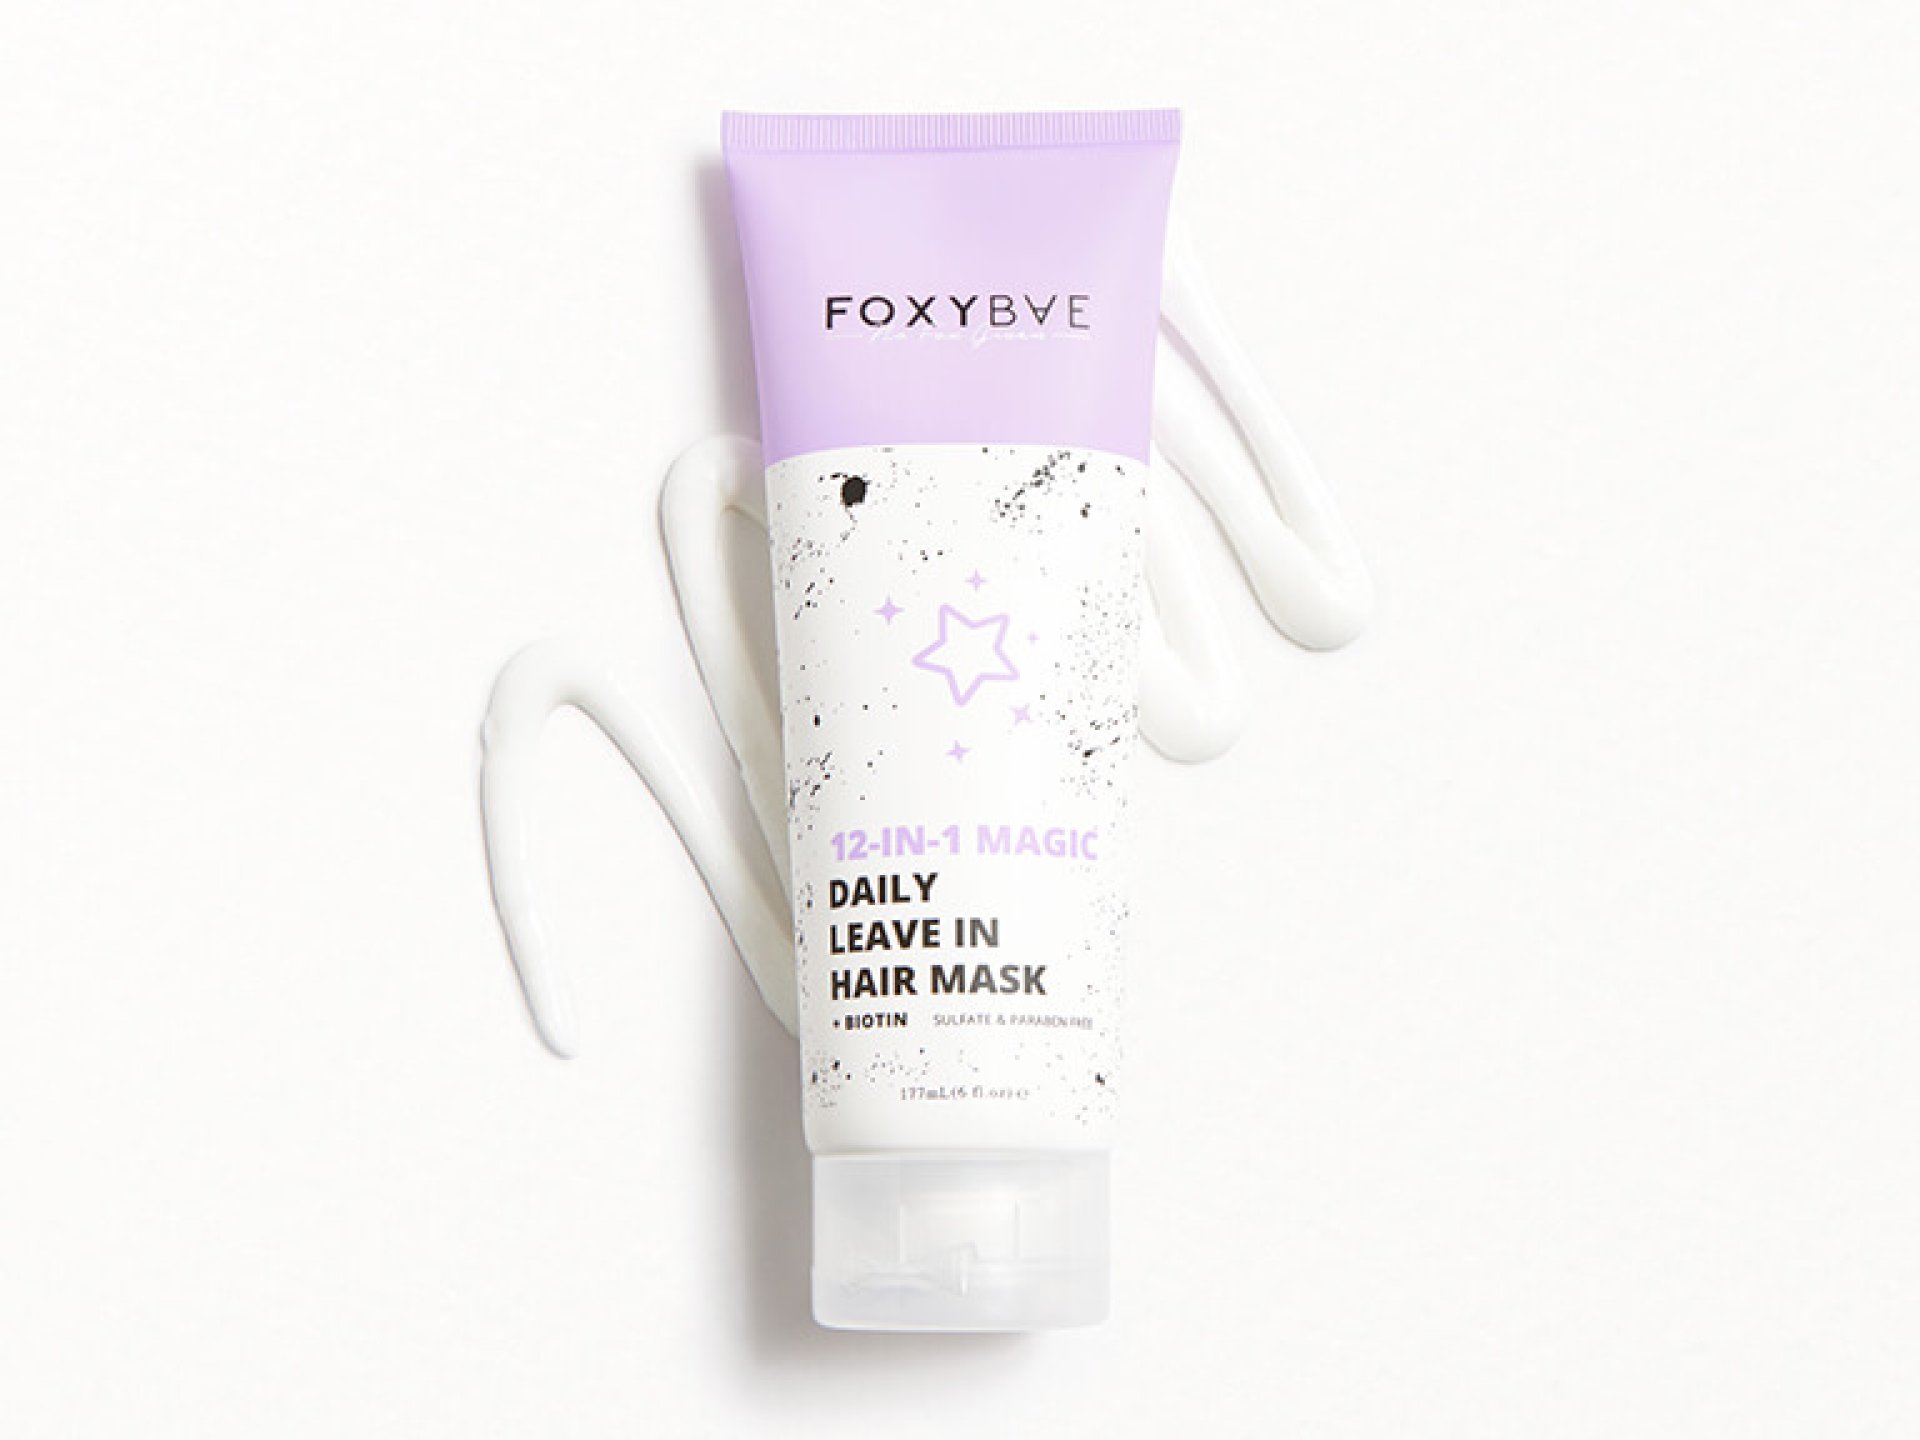 FOXYBAE 12-In-1 Magic Daily Leave in Hair Mask